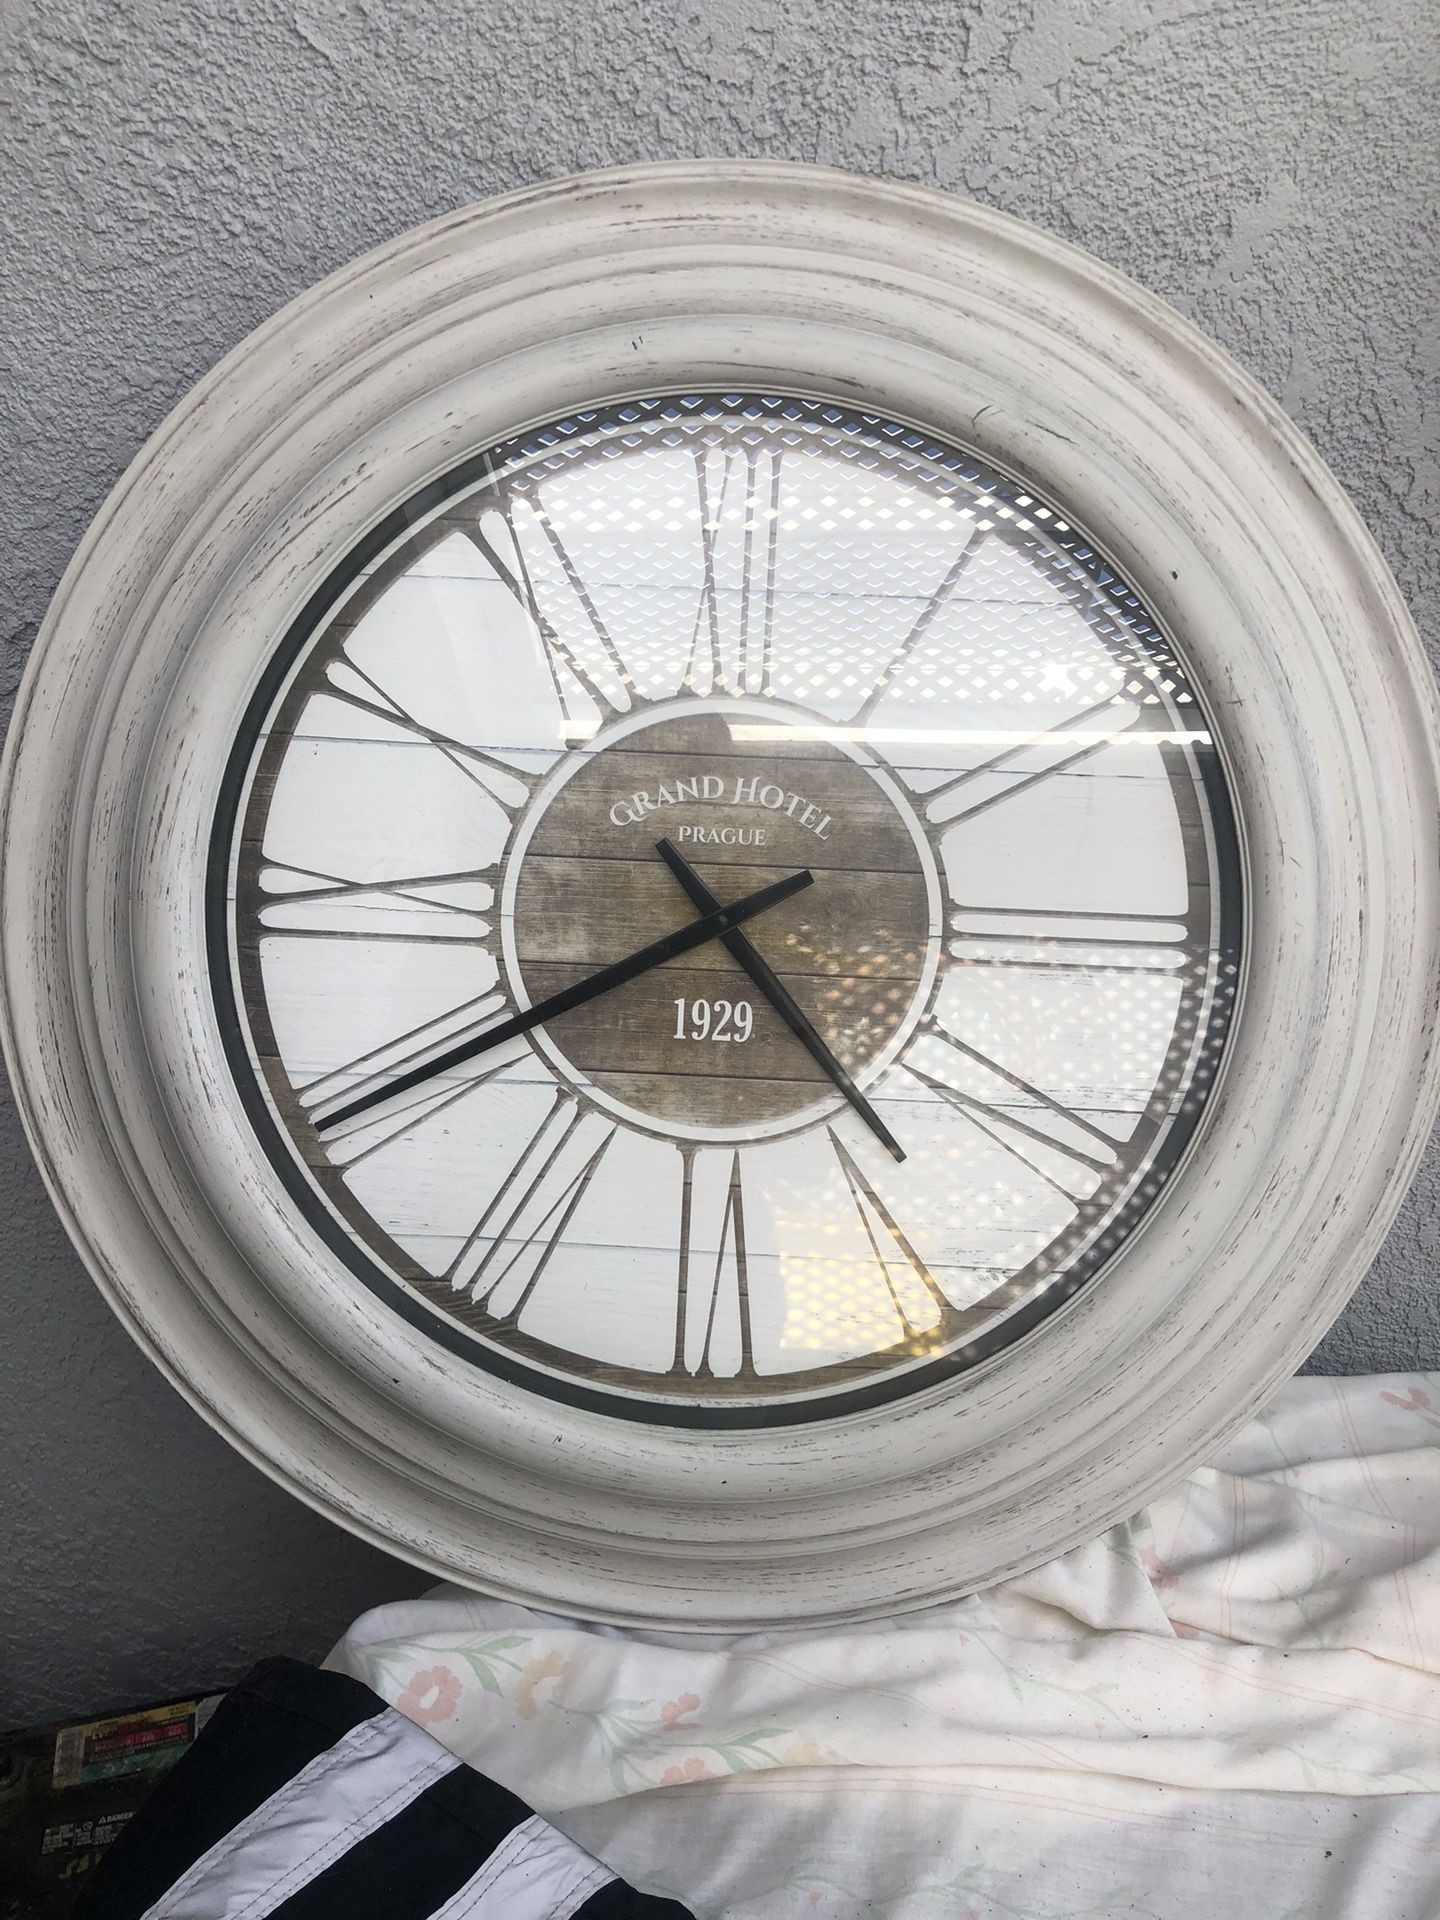 Extra Page Clock For Your Patio Wall Or Inside Walls. Size Approximately 31 Inches Long. 